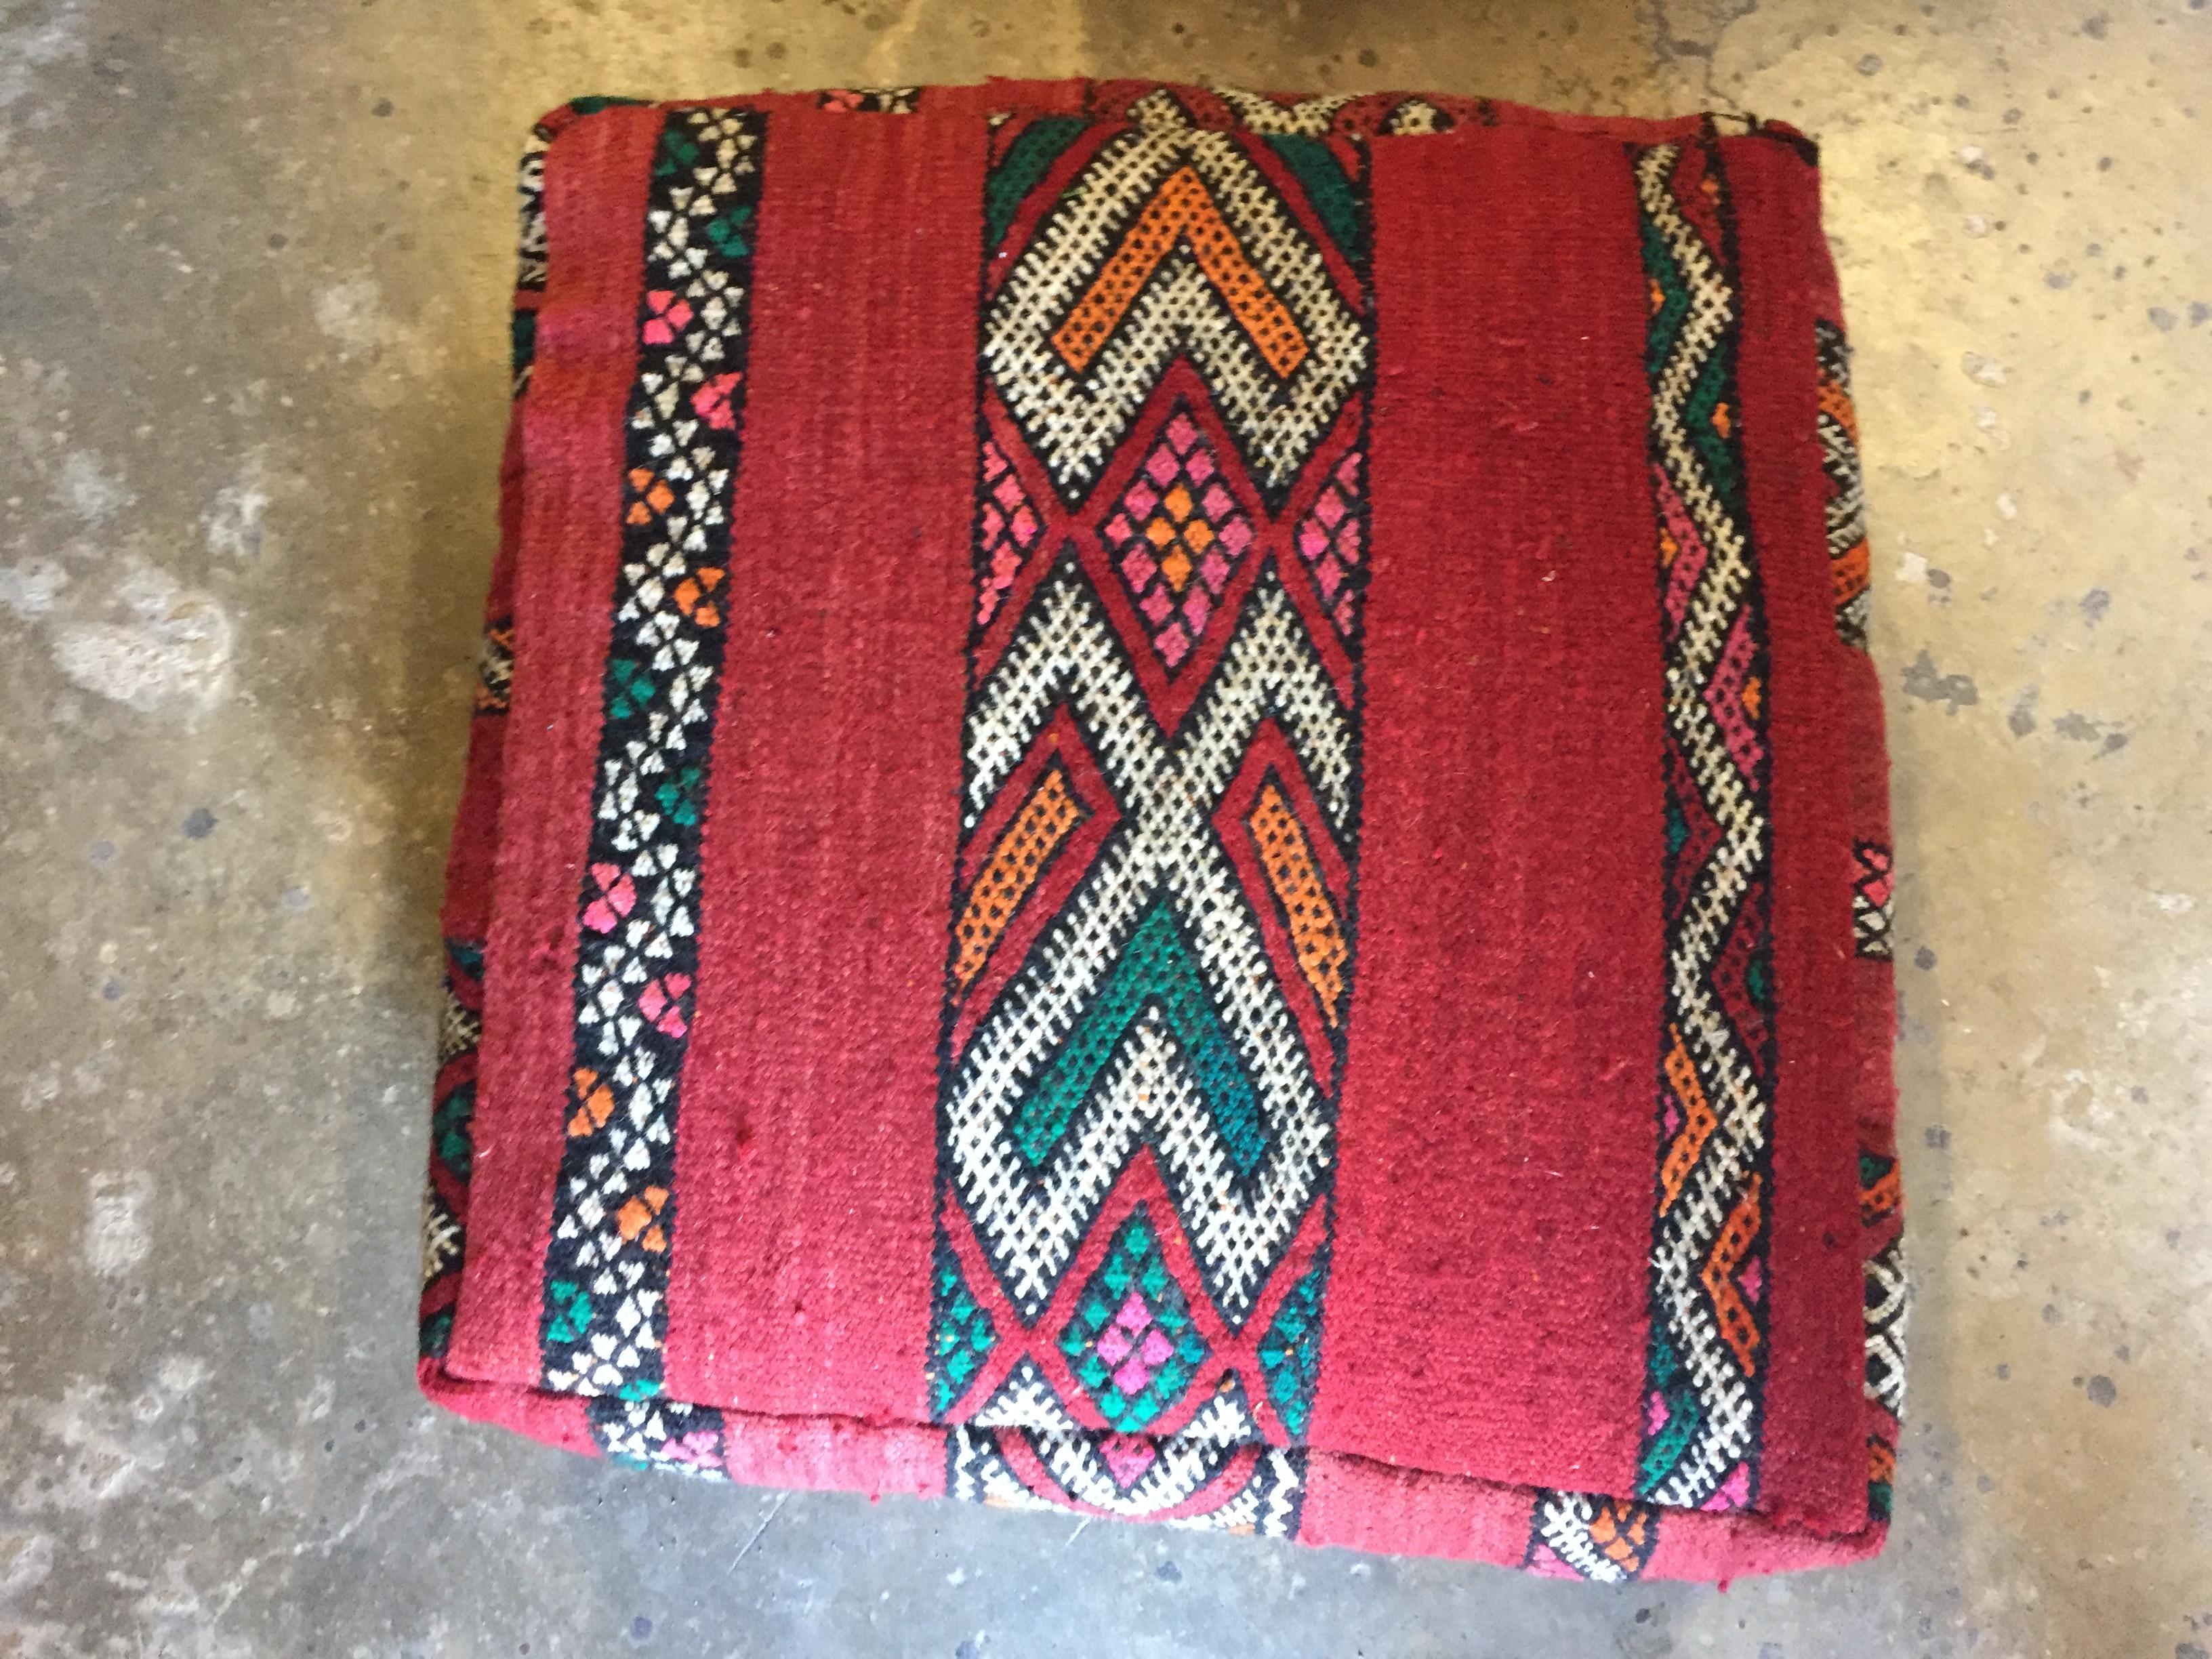 Moroccan vintage floor pillow seat cushion made from a Tribal Berber rug.
Square shape with nice faded earth tone colors for the top and rich warm stripes colors for the bottom.
Great addition for any Bohemian or modern interior.
Made from a